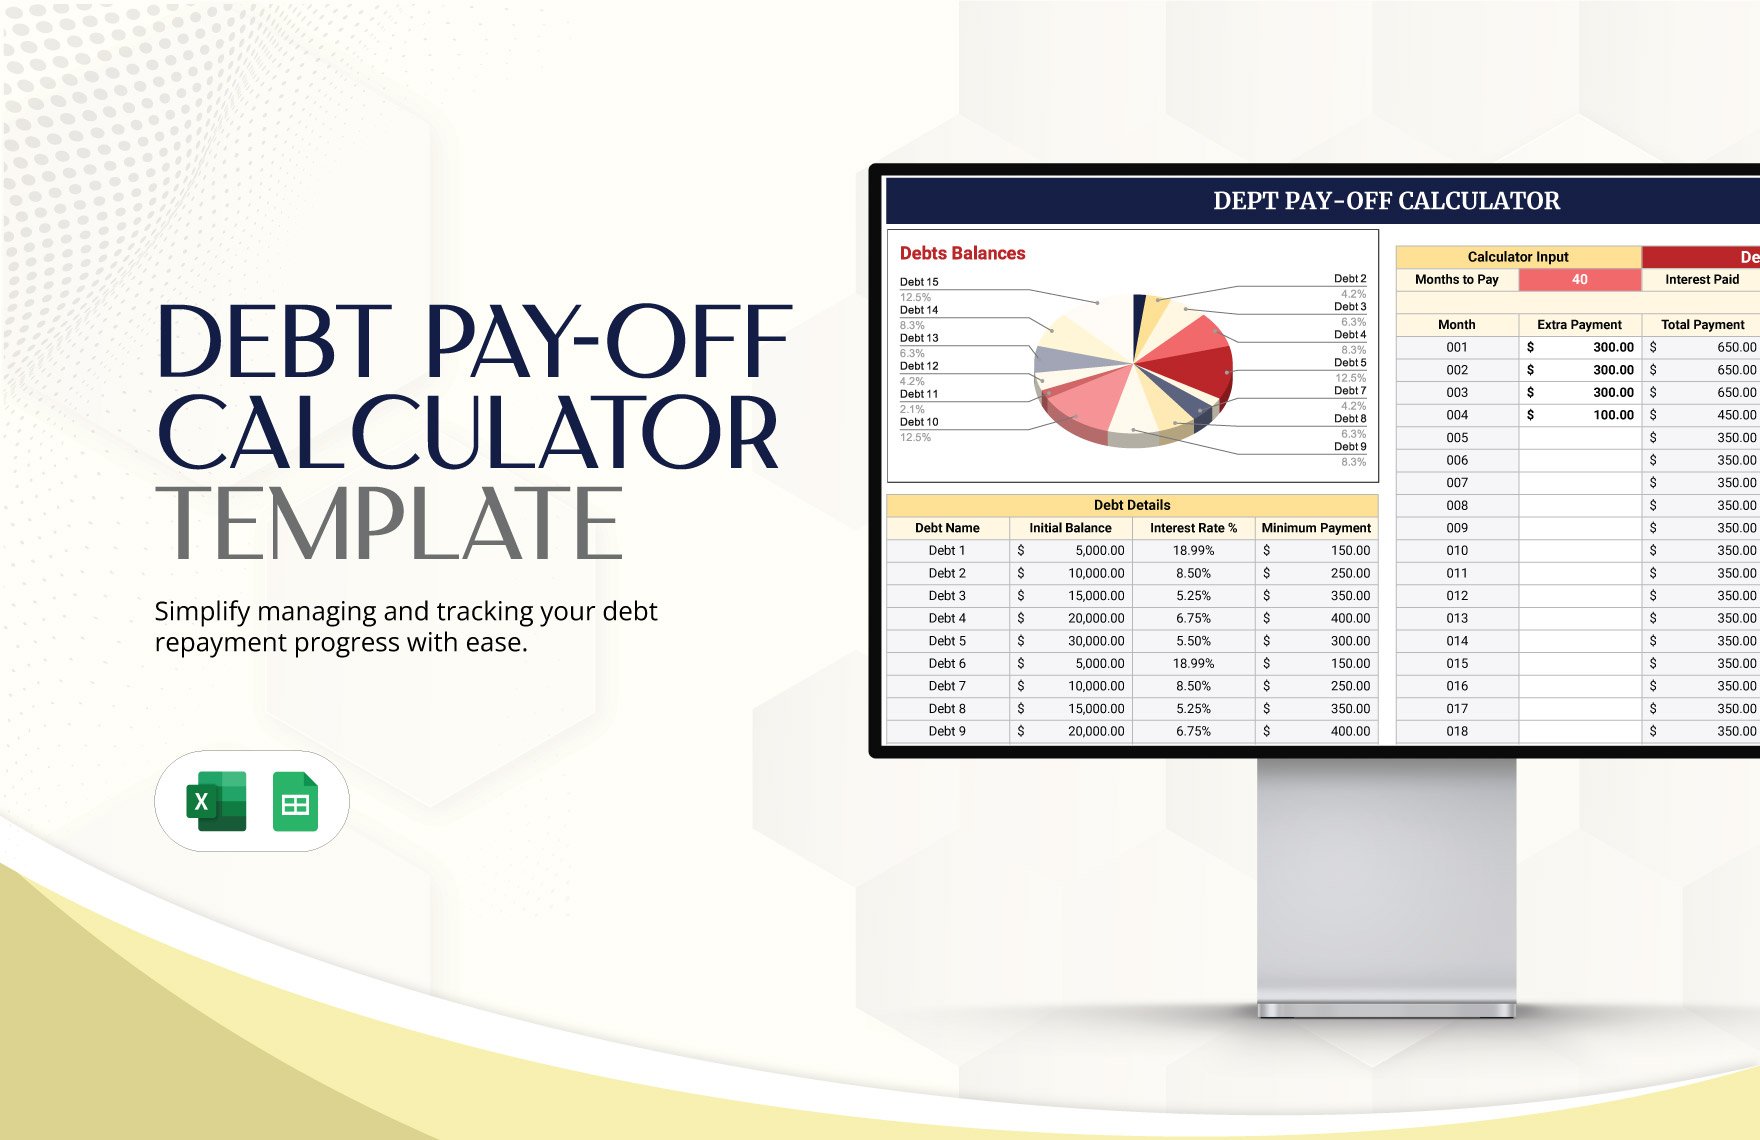 Debt Pay-Off Calculator Template in Excel, Google Sheets